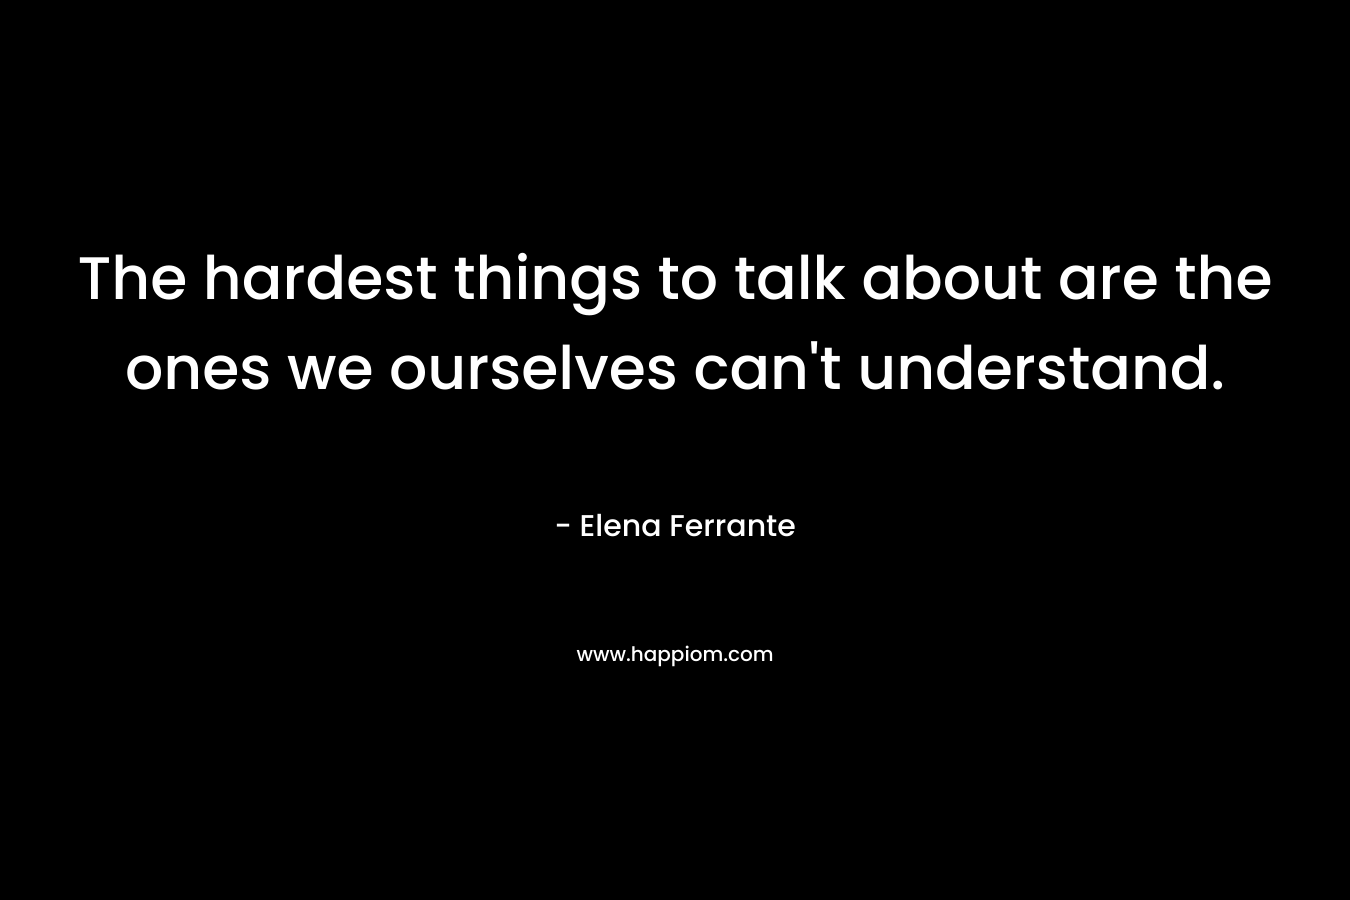 The hardest things to talk about are the ones we ourselves can’t understand. – Elena Ferrante